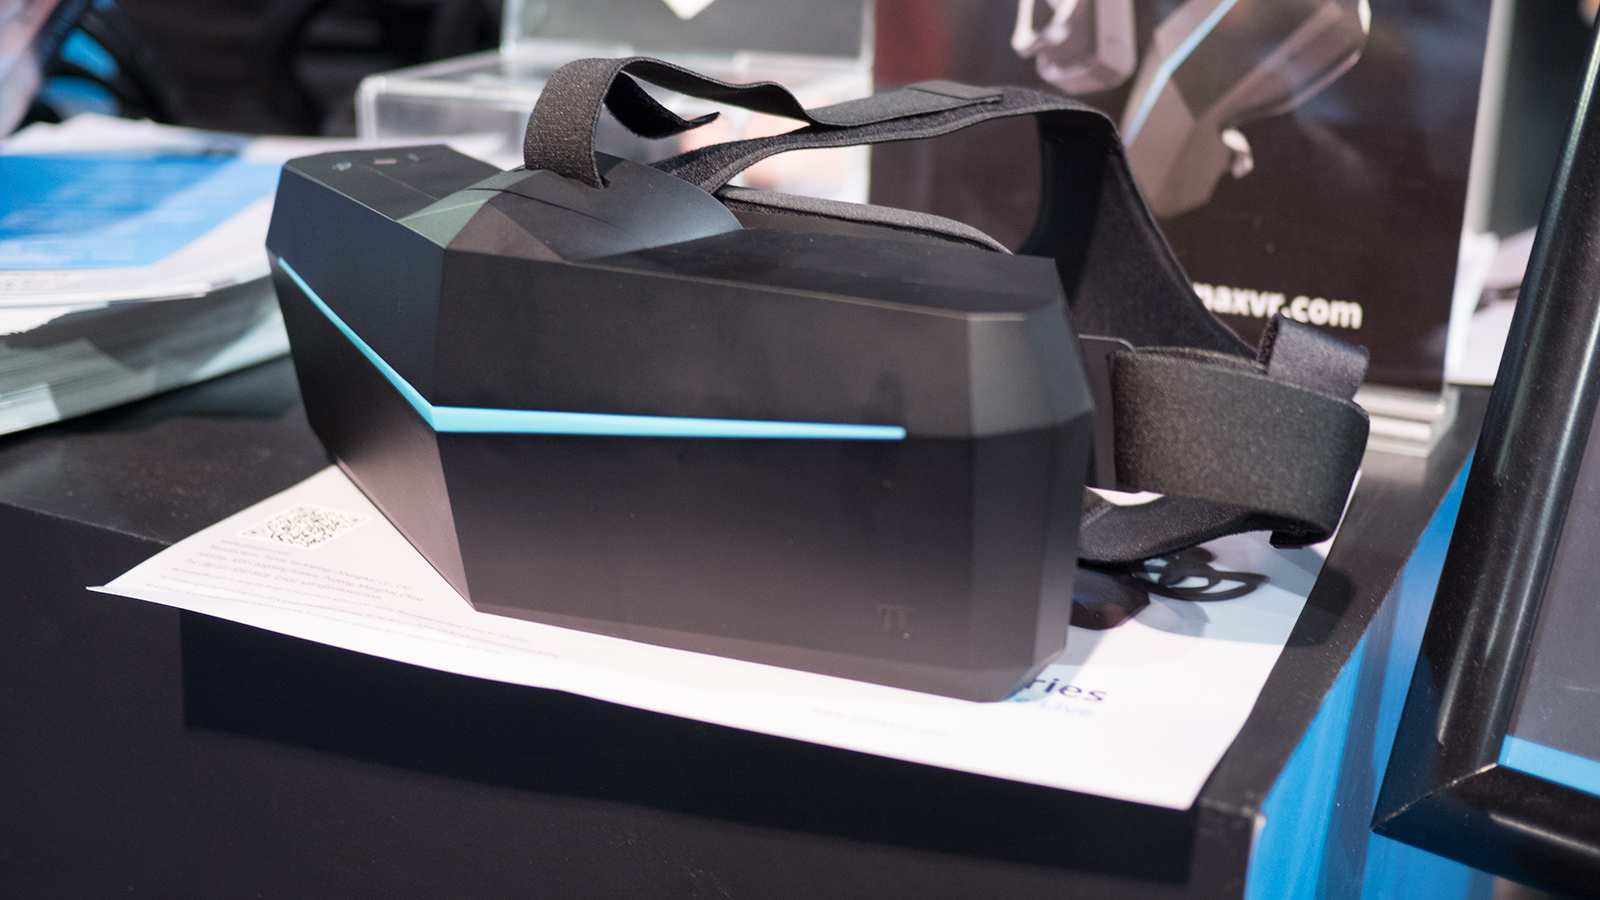 Pimax's '8K' ultra-wide high-resolution VR headset is to ship in February | TechRadar